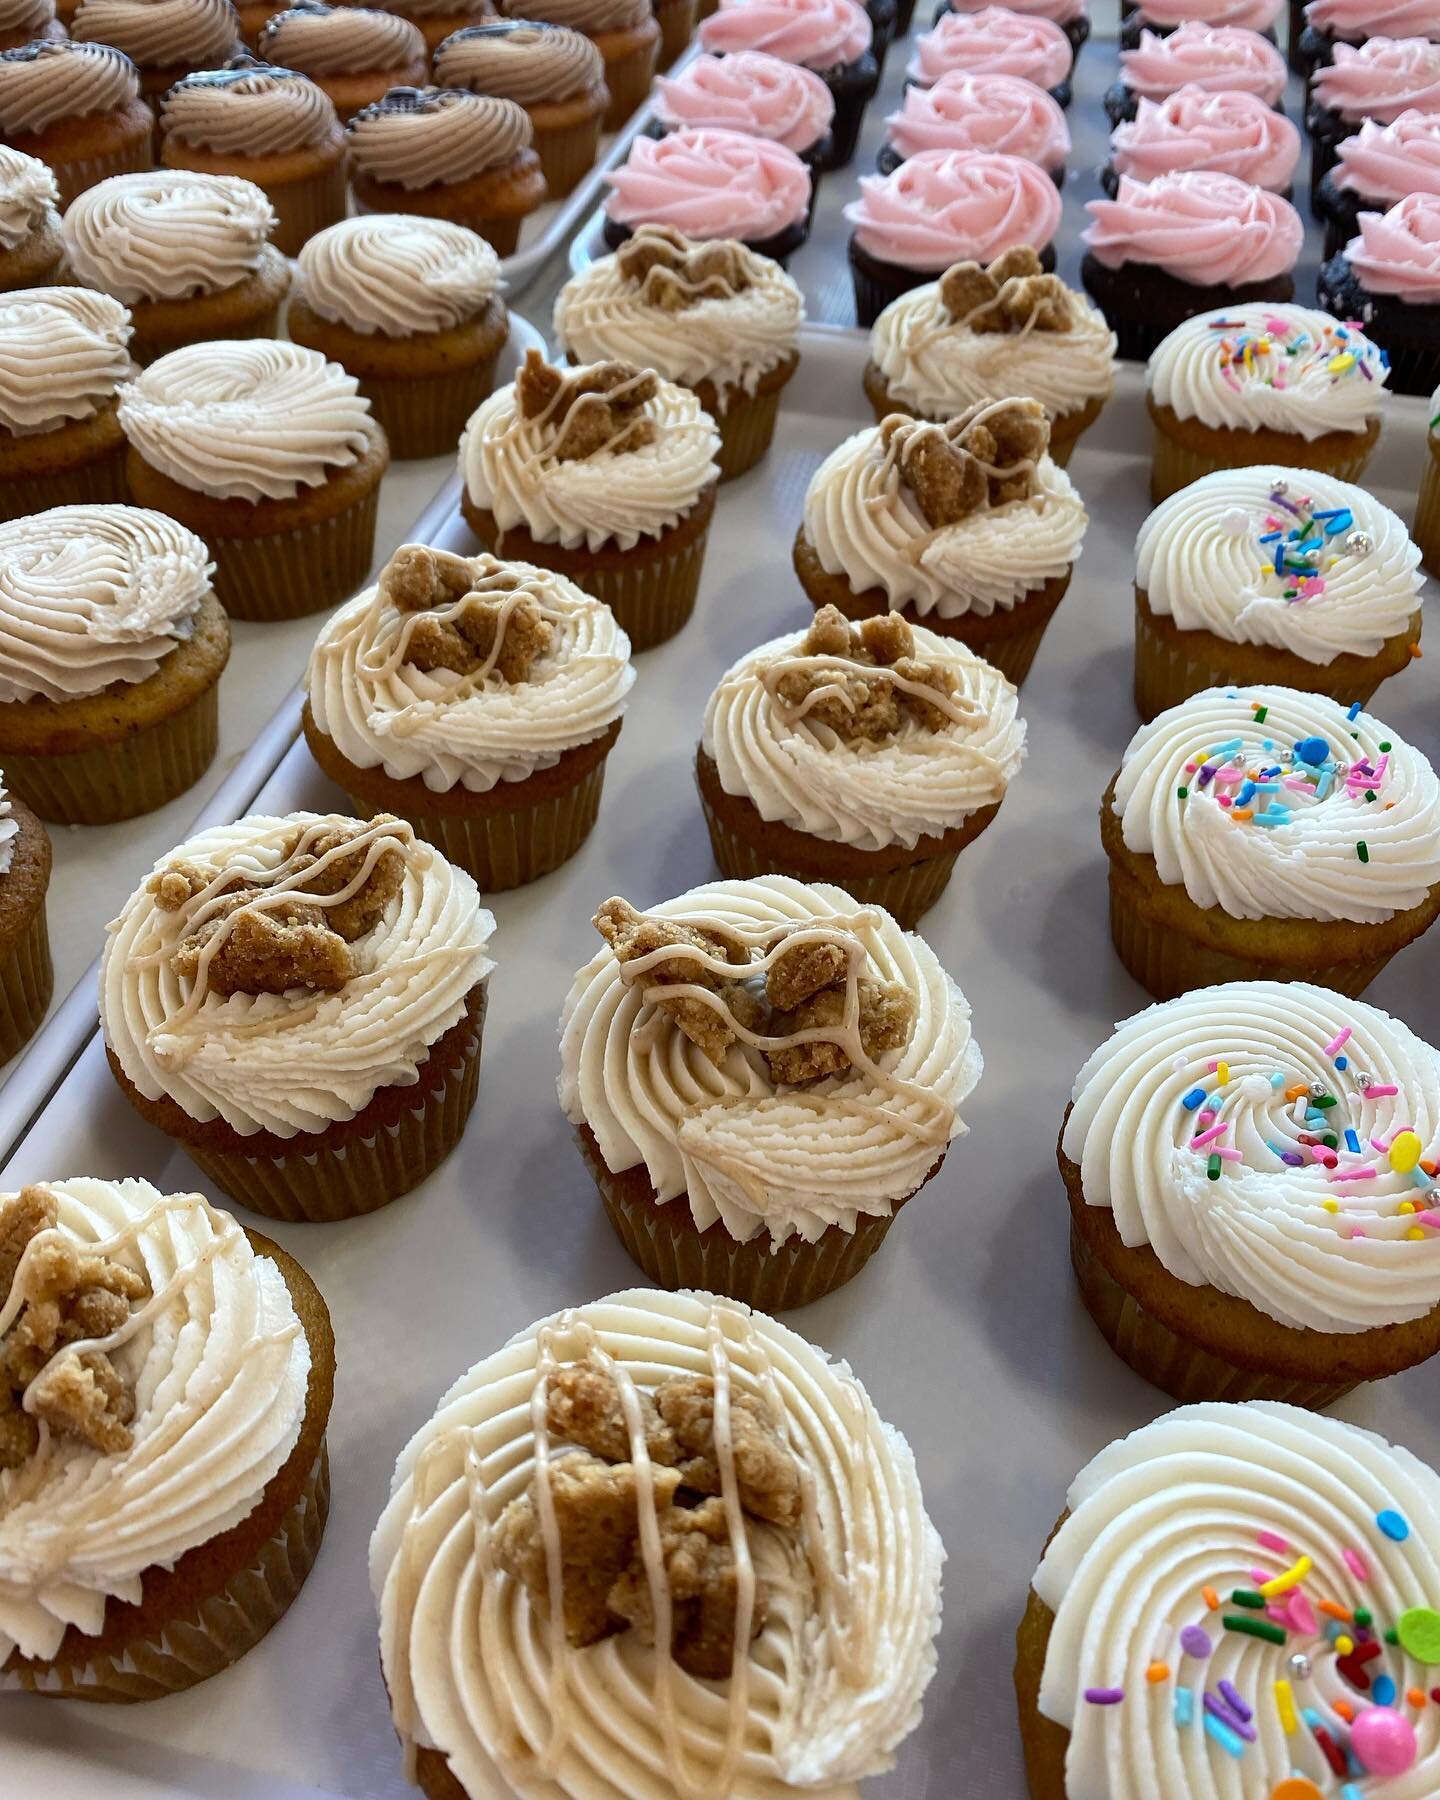 Good morning everyone and happy Friday! Cupcakes today are chocolate raspberry coconut, vanilla, maple brown sugar, strawberry nutella, chai latte, birthday cake, double chocolate, persian, lemon, chocolate peanut butter cup, strawberry confetti cook